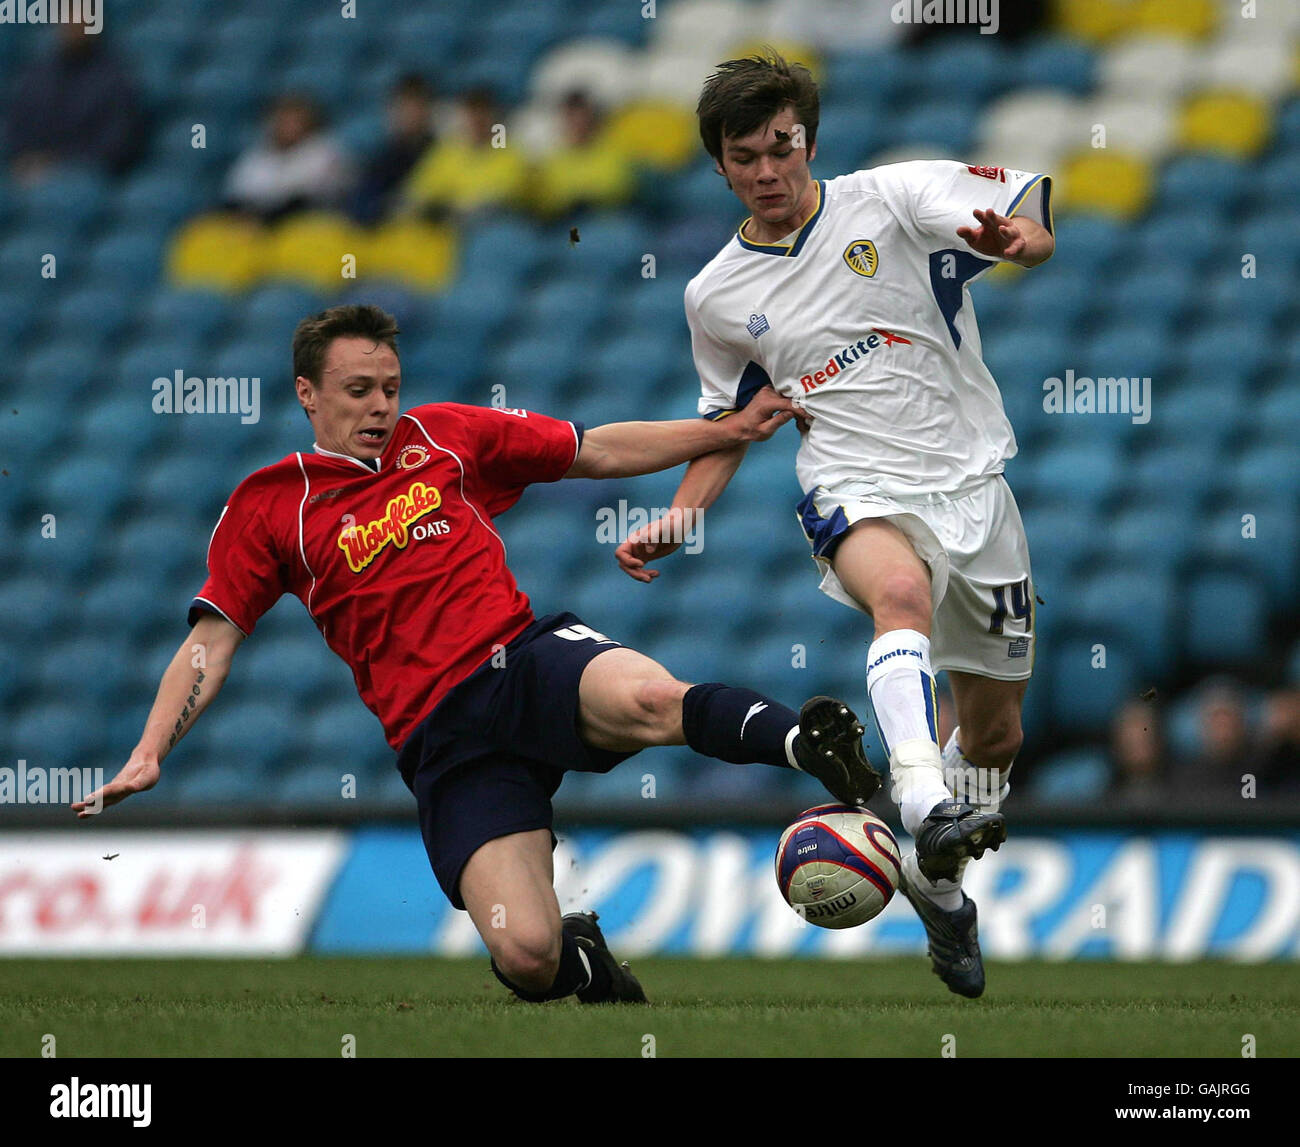 Leeds United's Jonathan Howson and Crew Alexandra's Gary Roberts during the Coca-Cola Football League One match at Elland Road, Leeds. Stock Photo